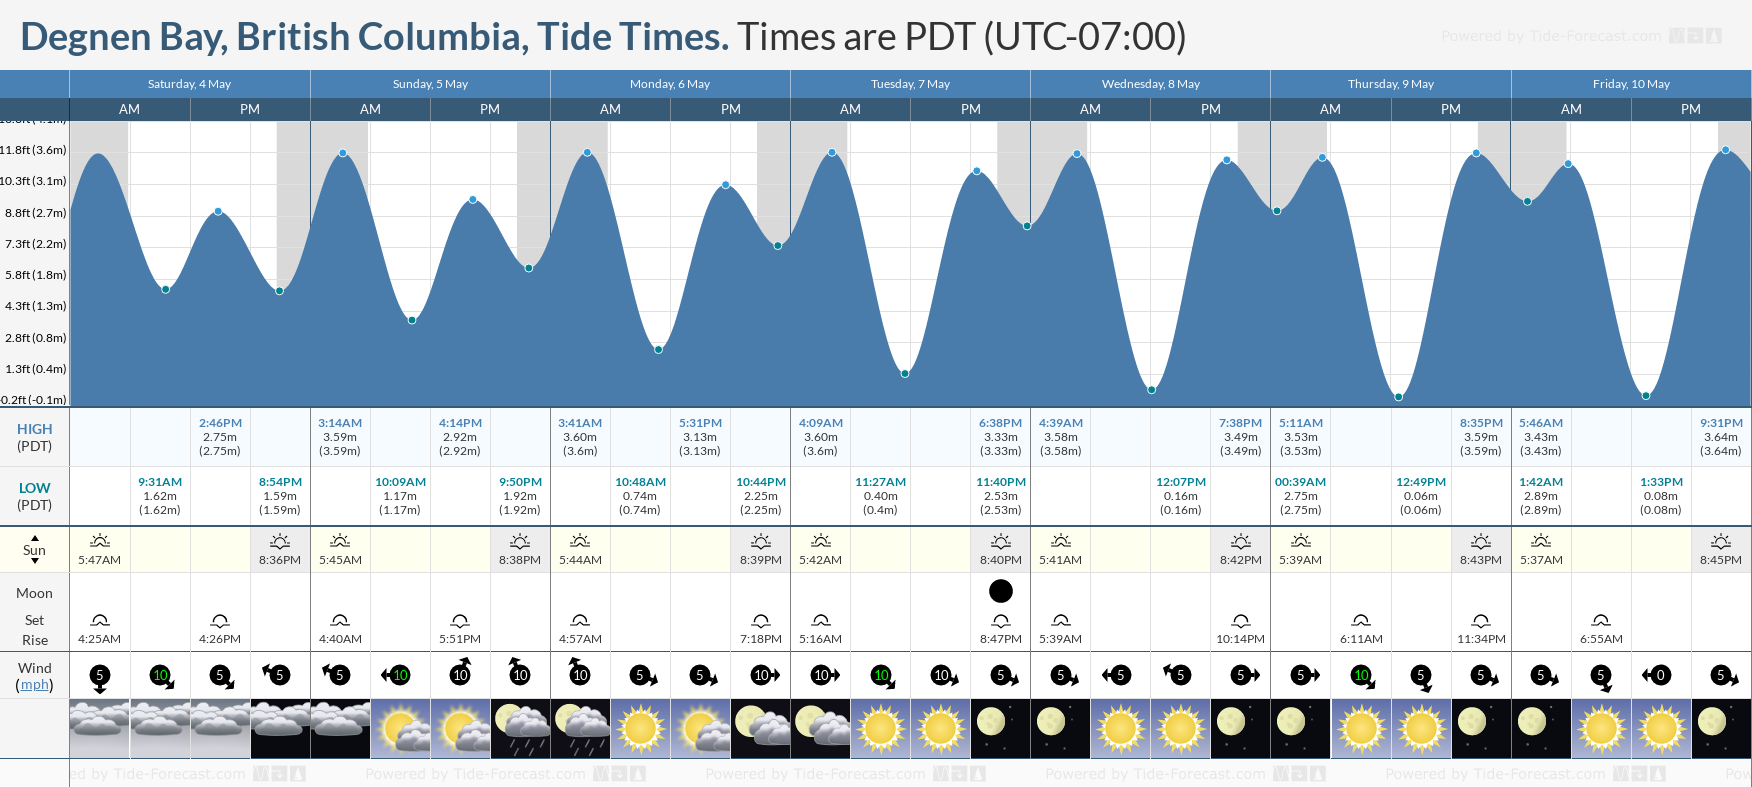 Degnen Bay, British Columbia Tide Chart including high and low tide tide times for the next 7 days